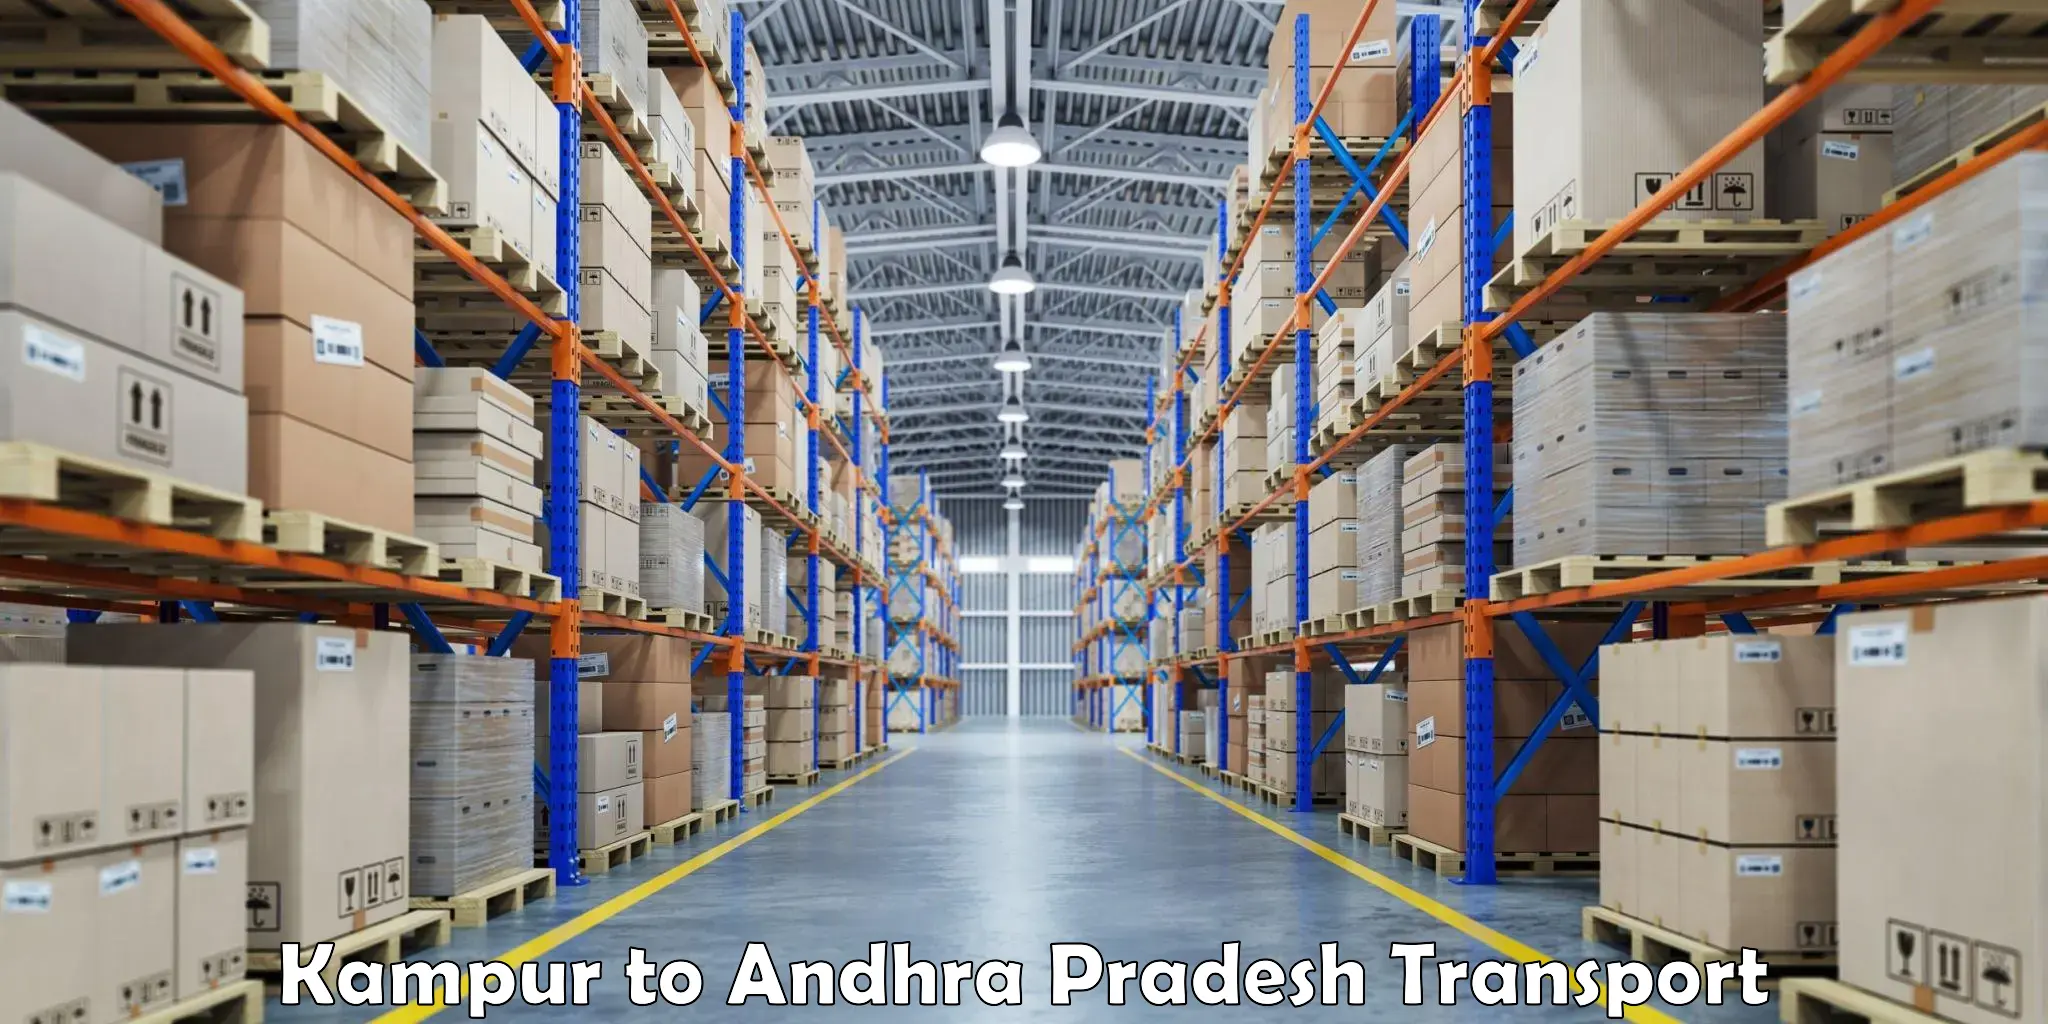 Part load transport service in India Kampur to Mudigubba